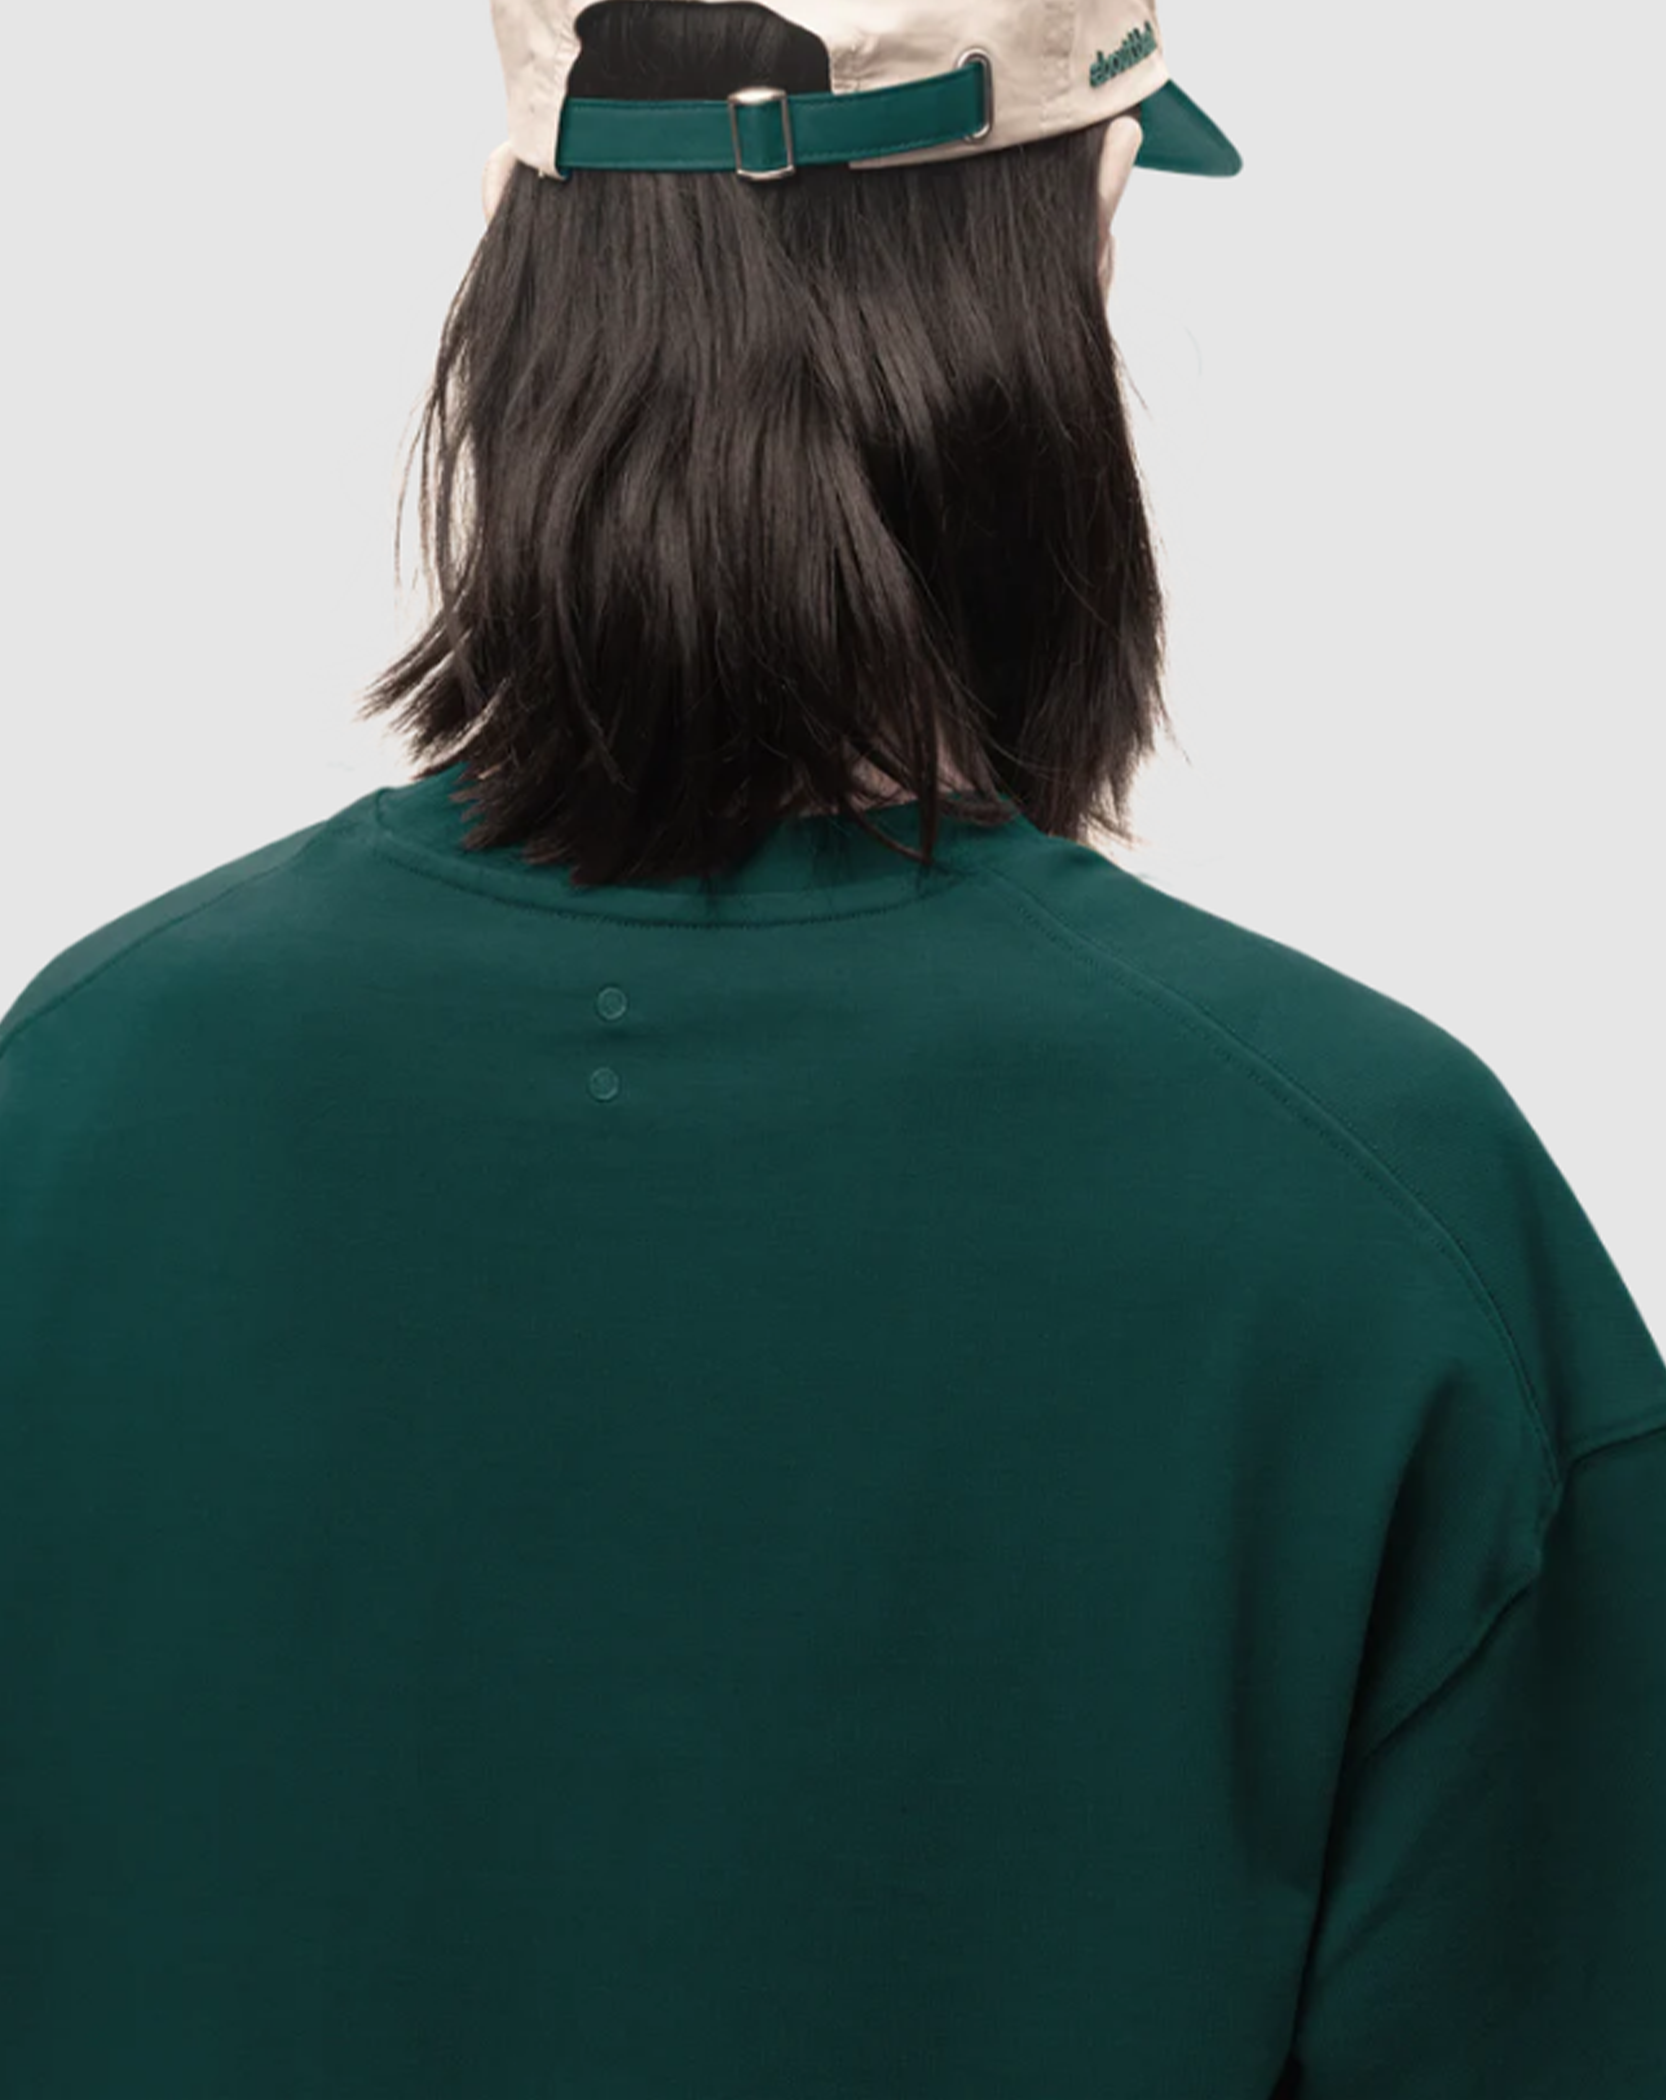 About blank - logo t-shirt epsom green